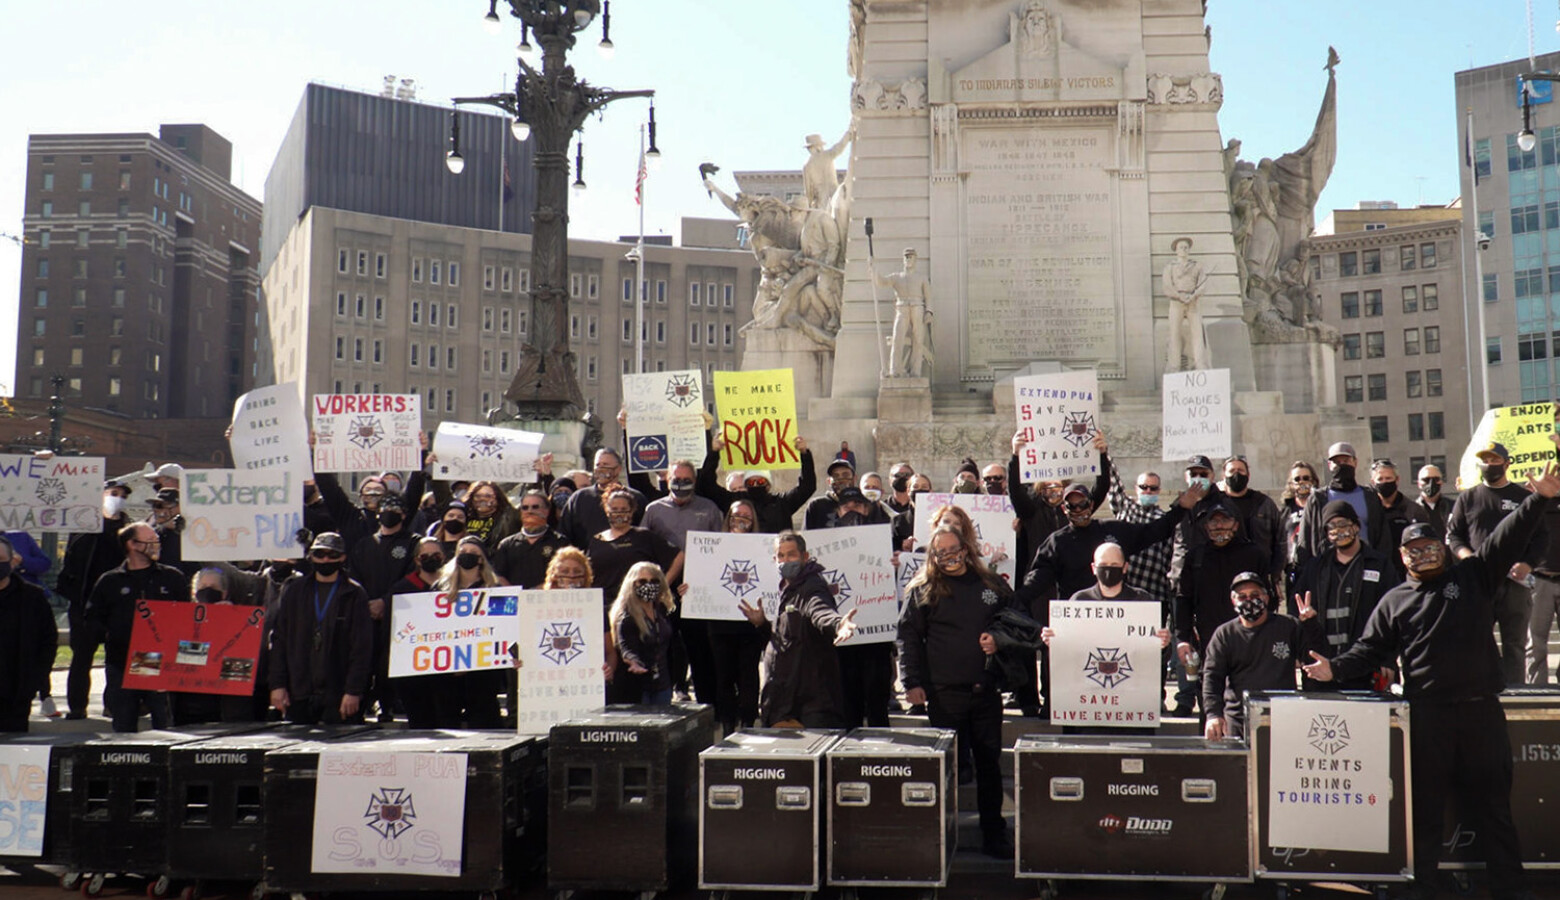 Live event and entertainment workers rally in Indianapolis. (Alan Mbathi/IPB News)